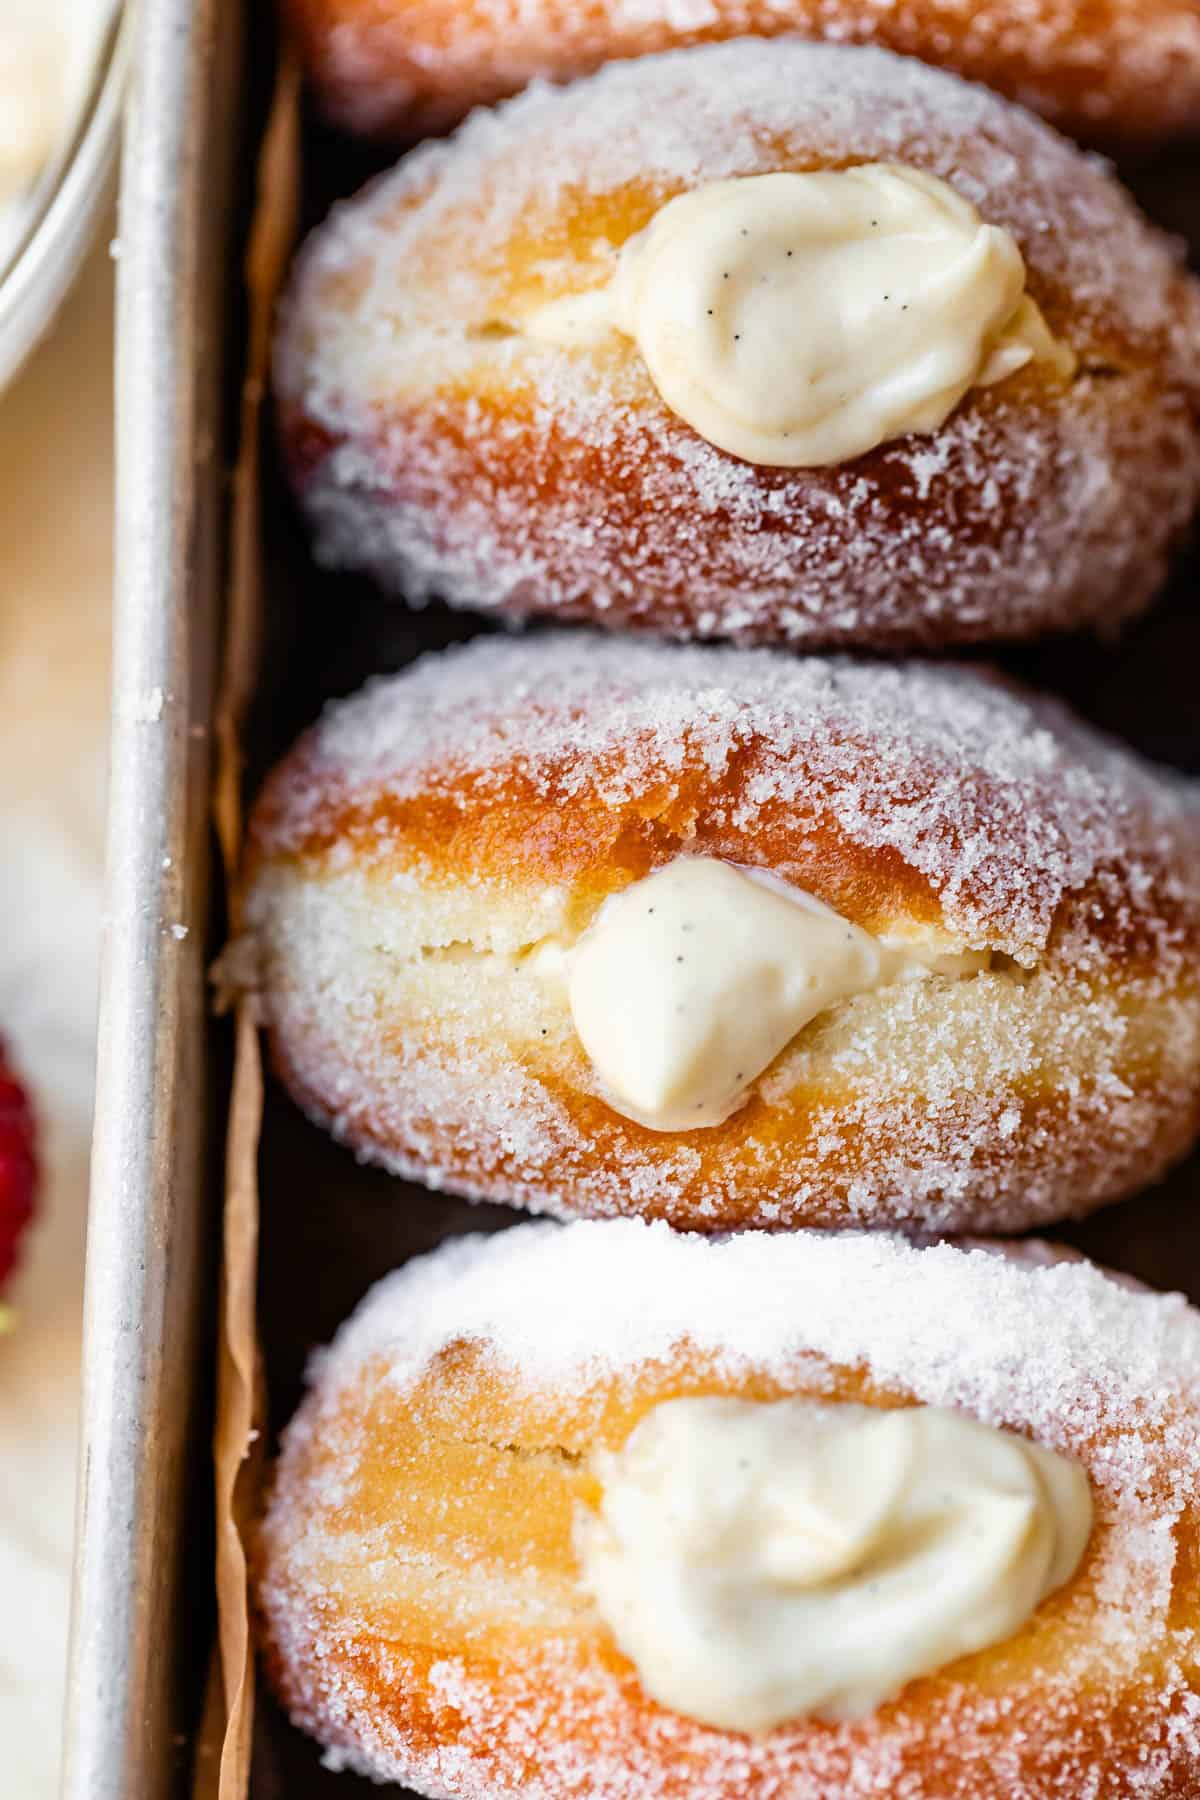 three sugar rolled donuts puffy with Bavarian cream filling in a metal baking dish.